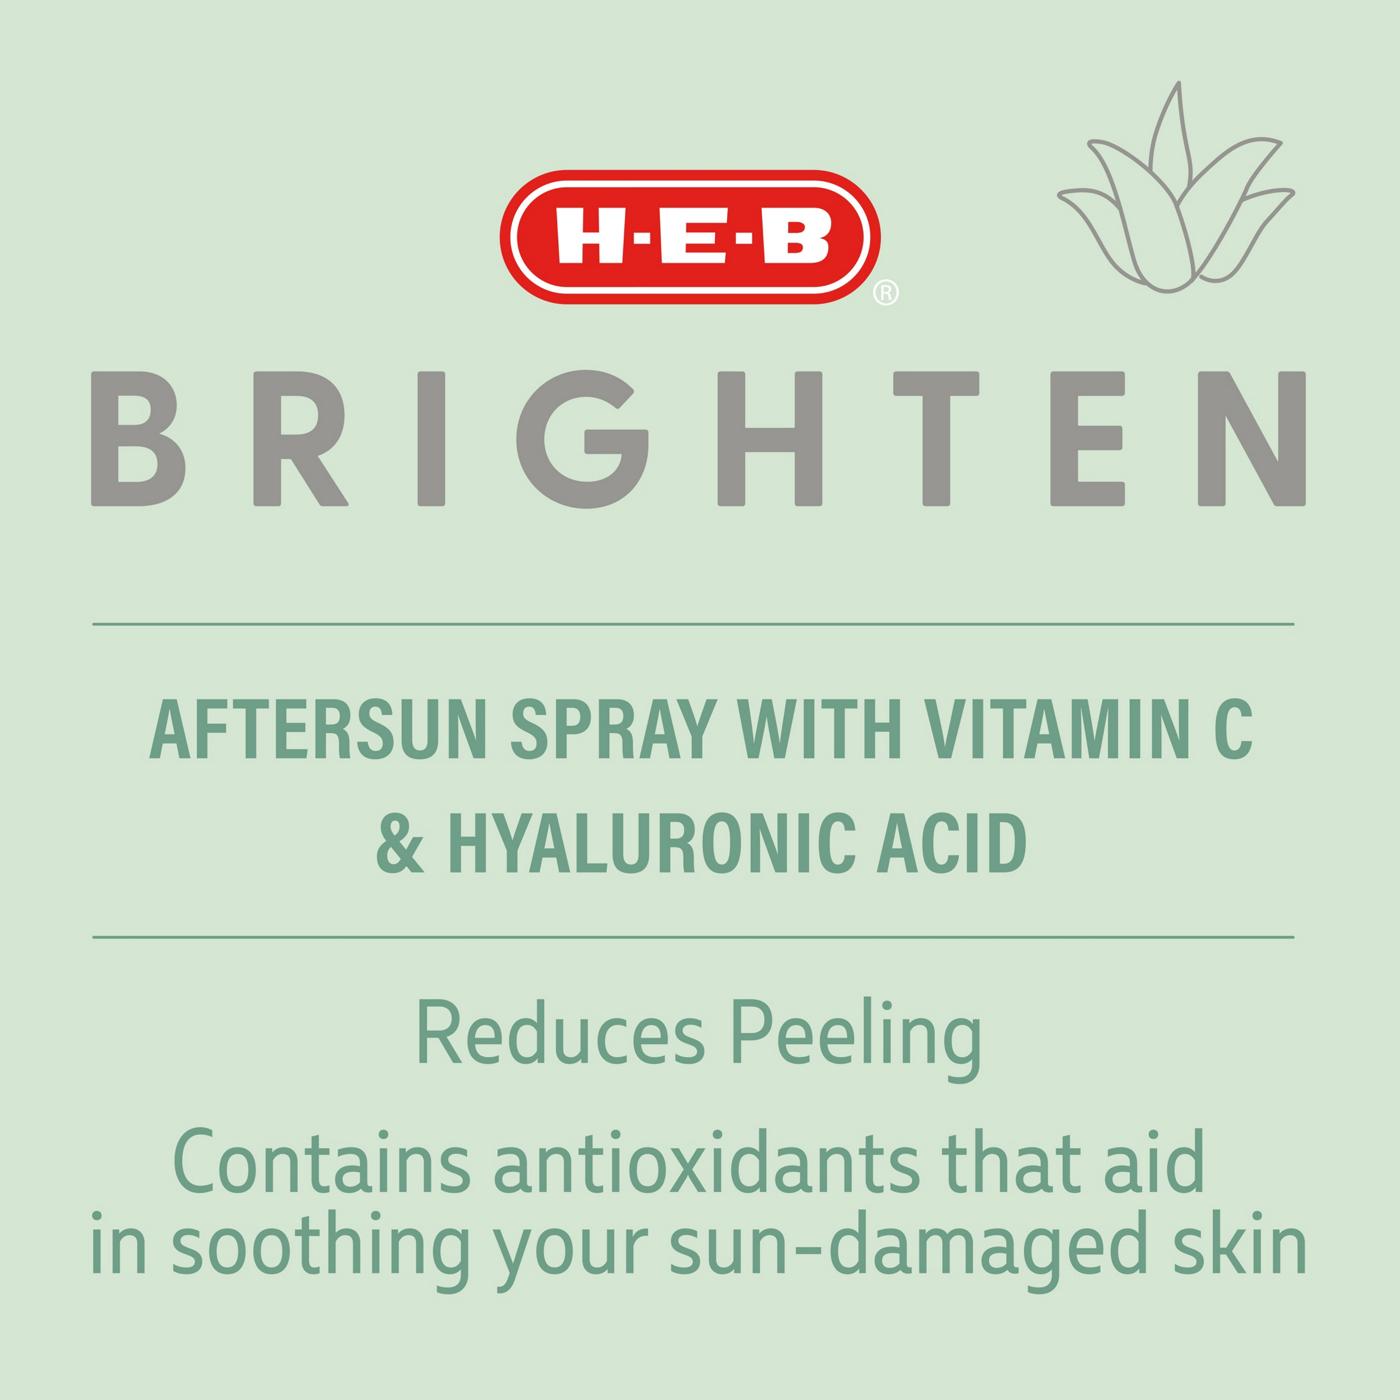 H-E-B Brighten Aftersun Spray with Vitamin C & Hyaluronic Acid; image 2 of 3